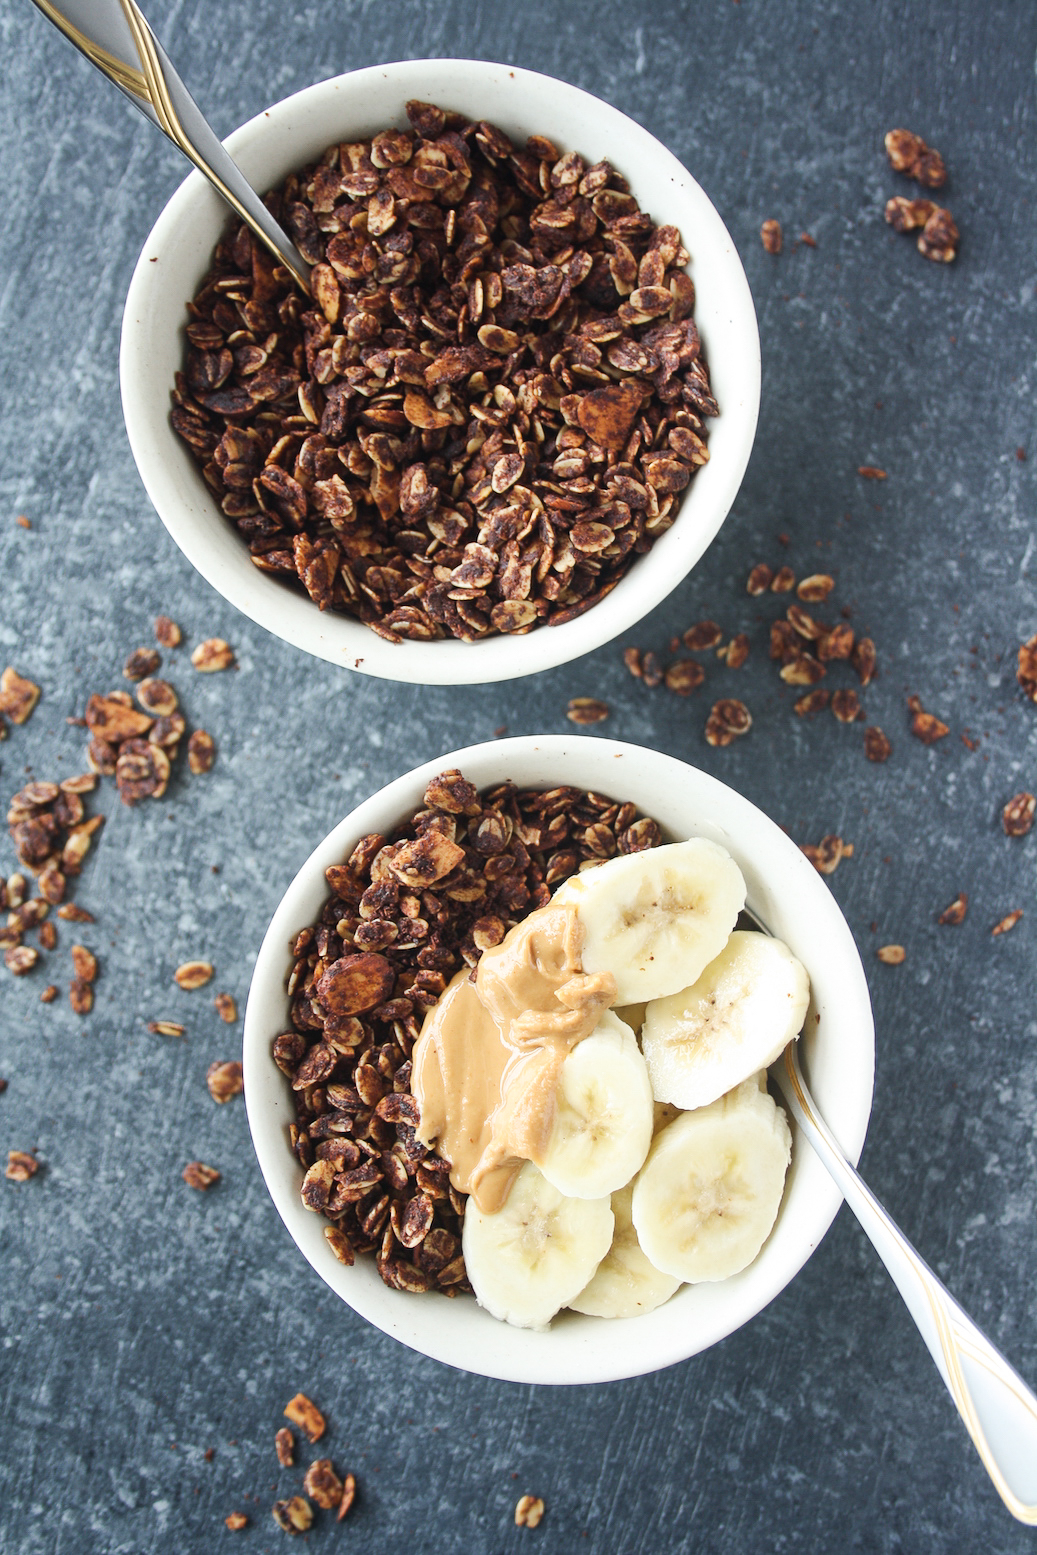 Crispy, chocolate granola with peanut butter and almonds. Gluten-free and easily vegan!